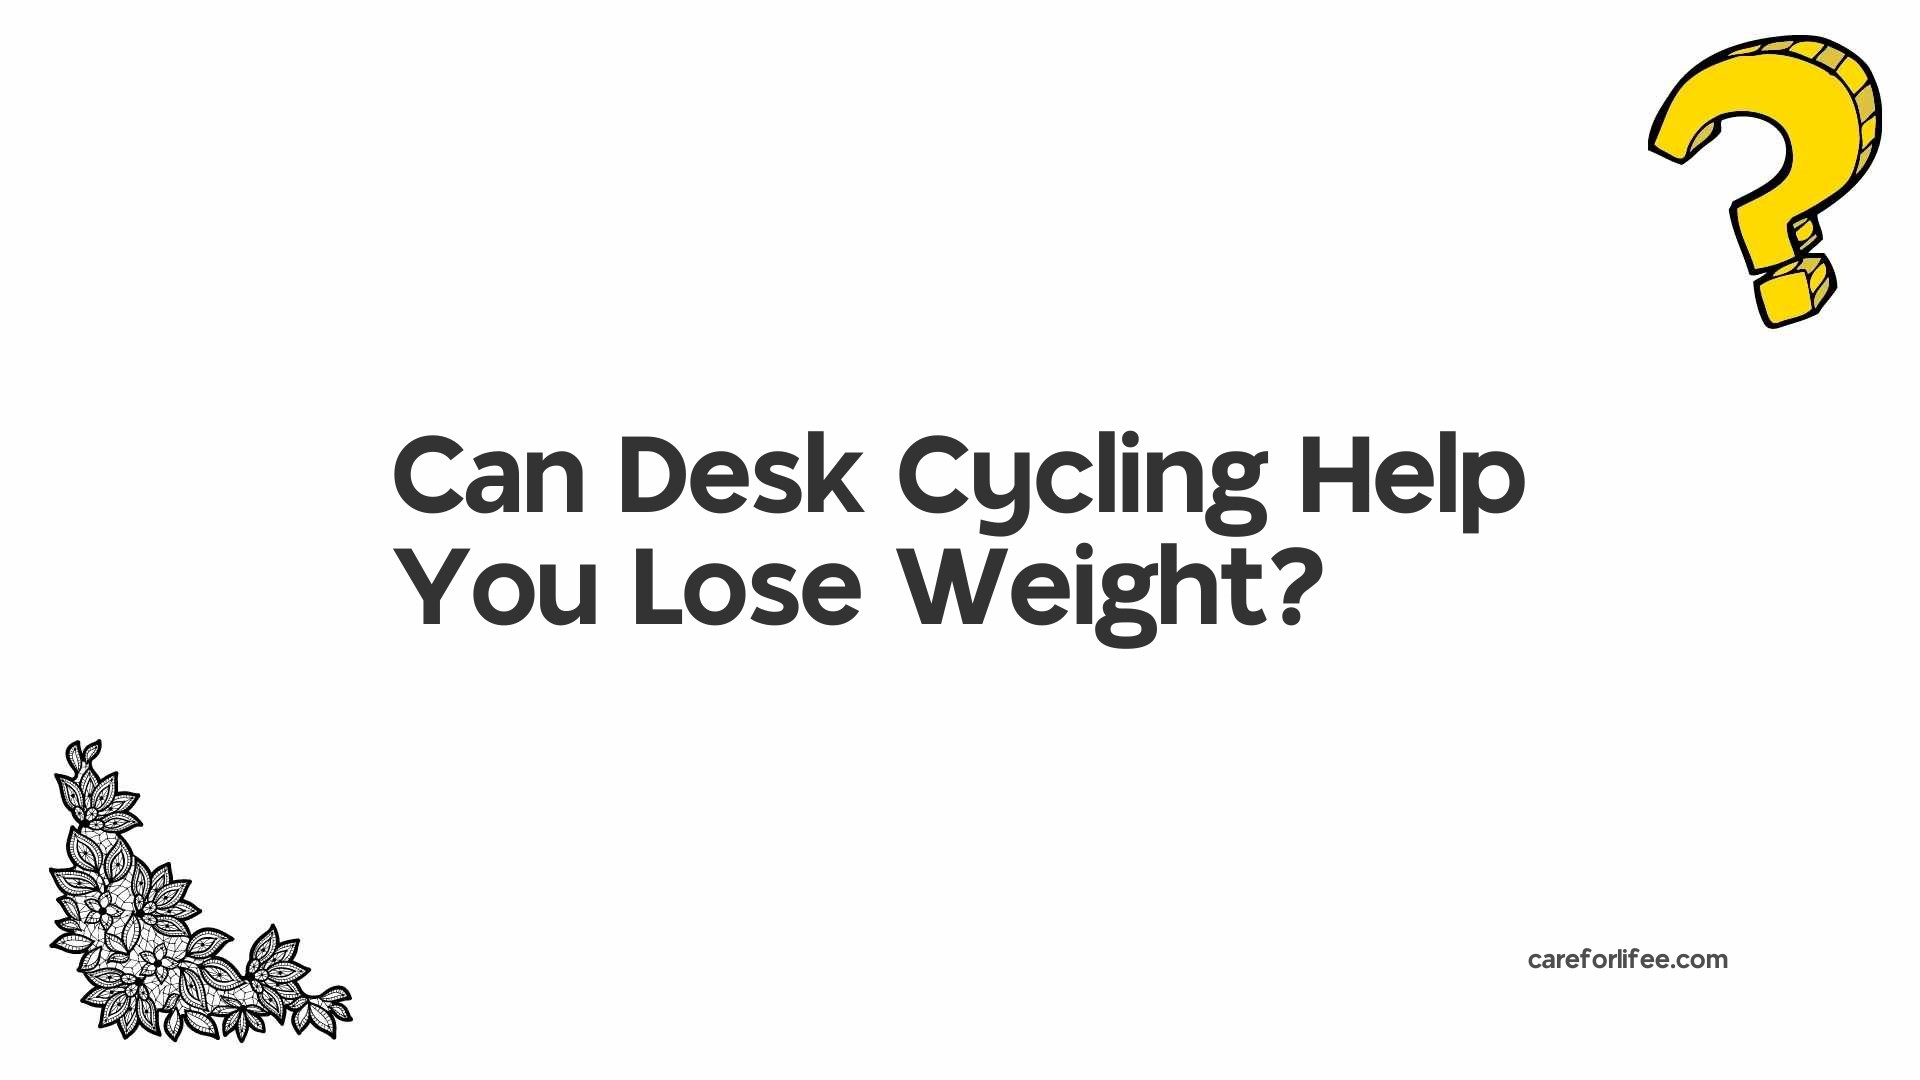 Can Desk Cycling Help You Lose Weight?